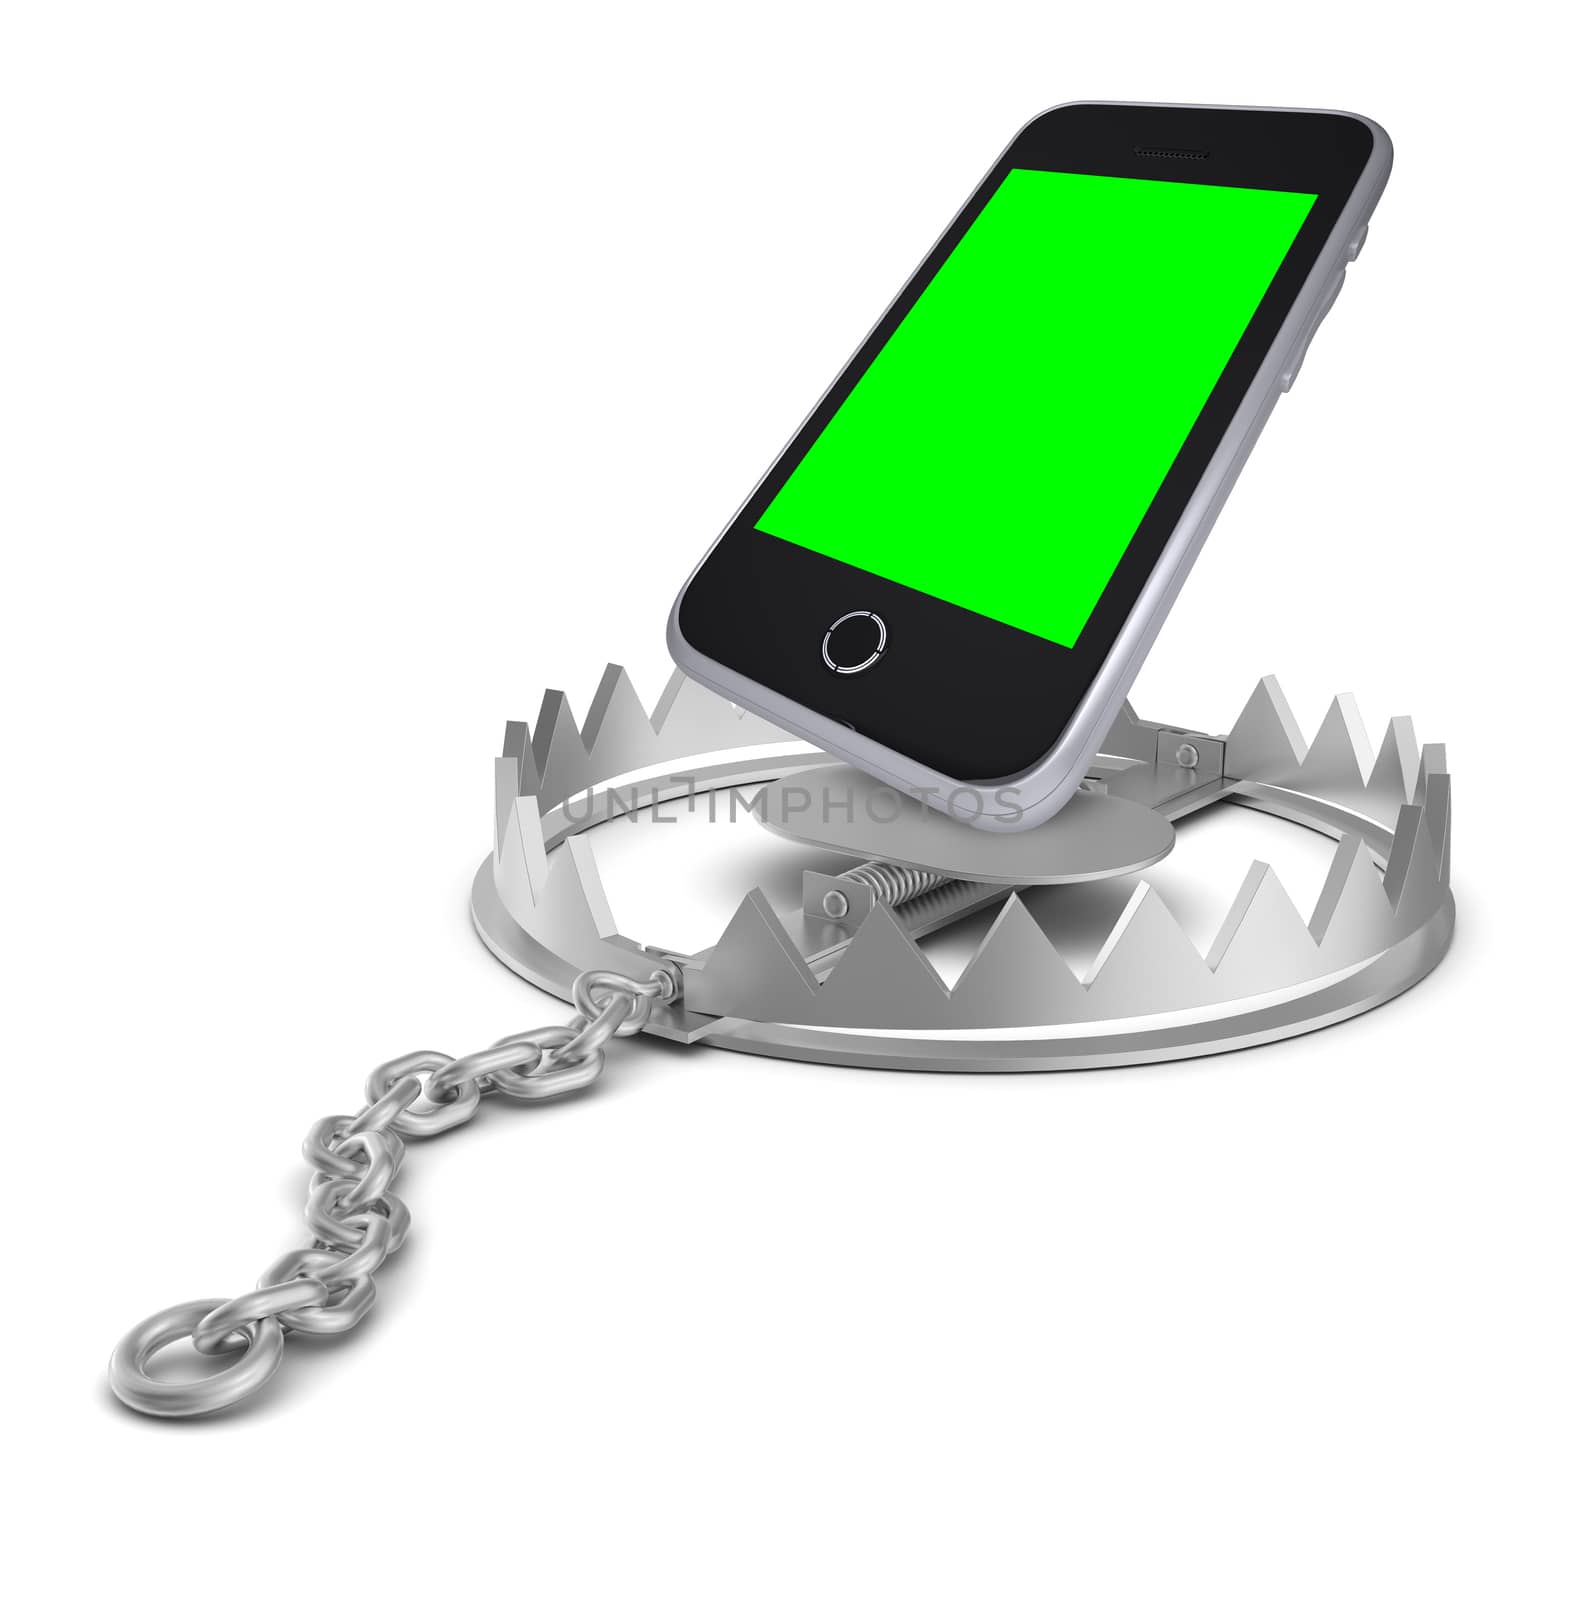 Smartphone in bear trap on isolated white background, close-up view